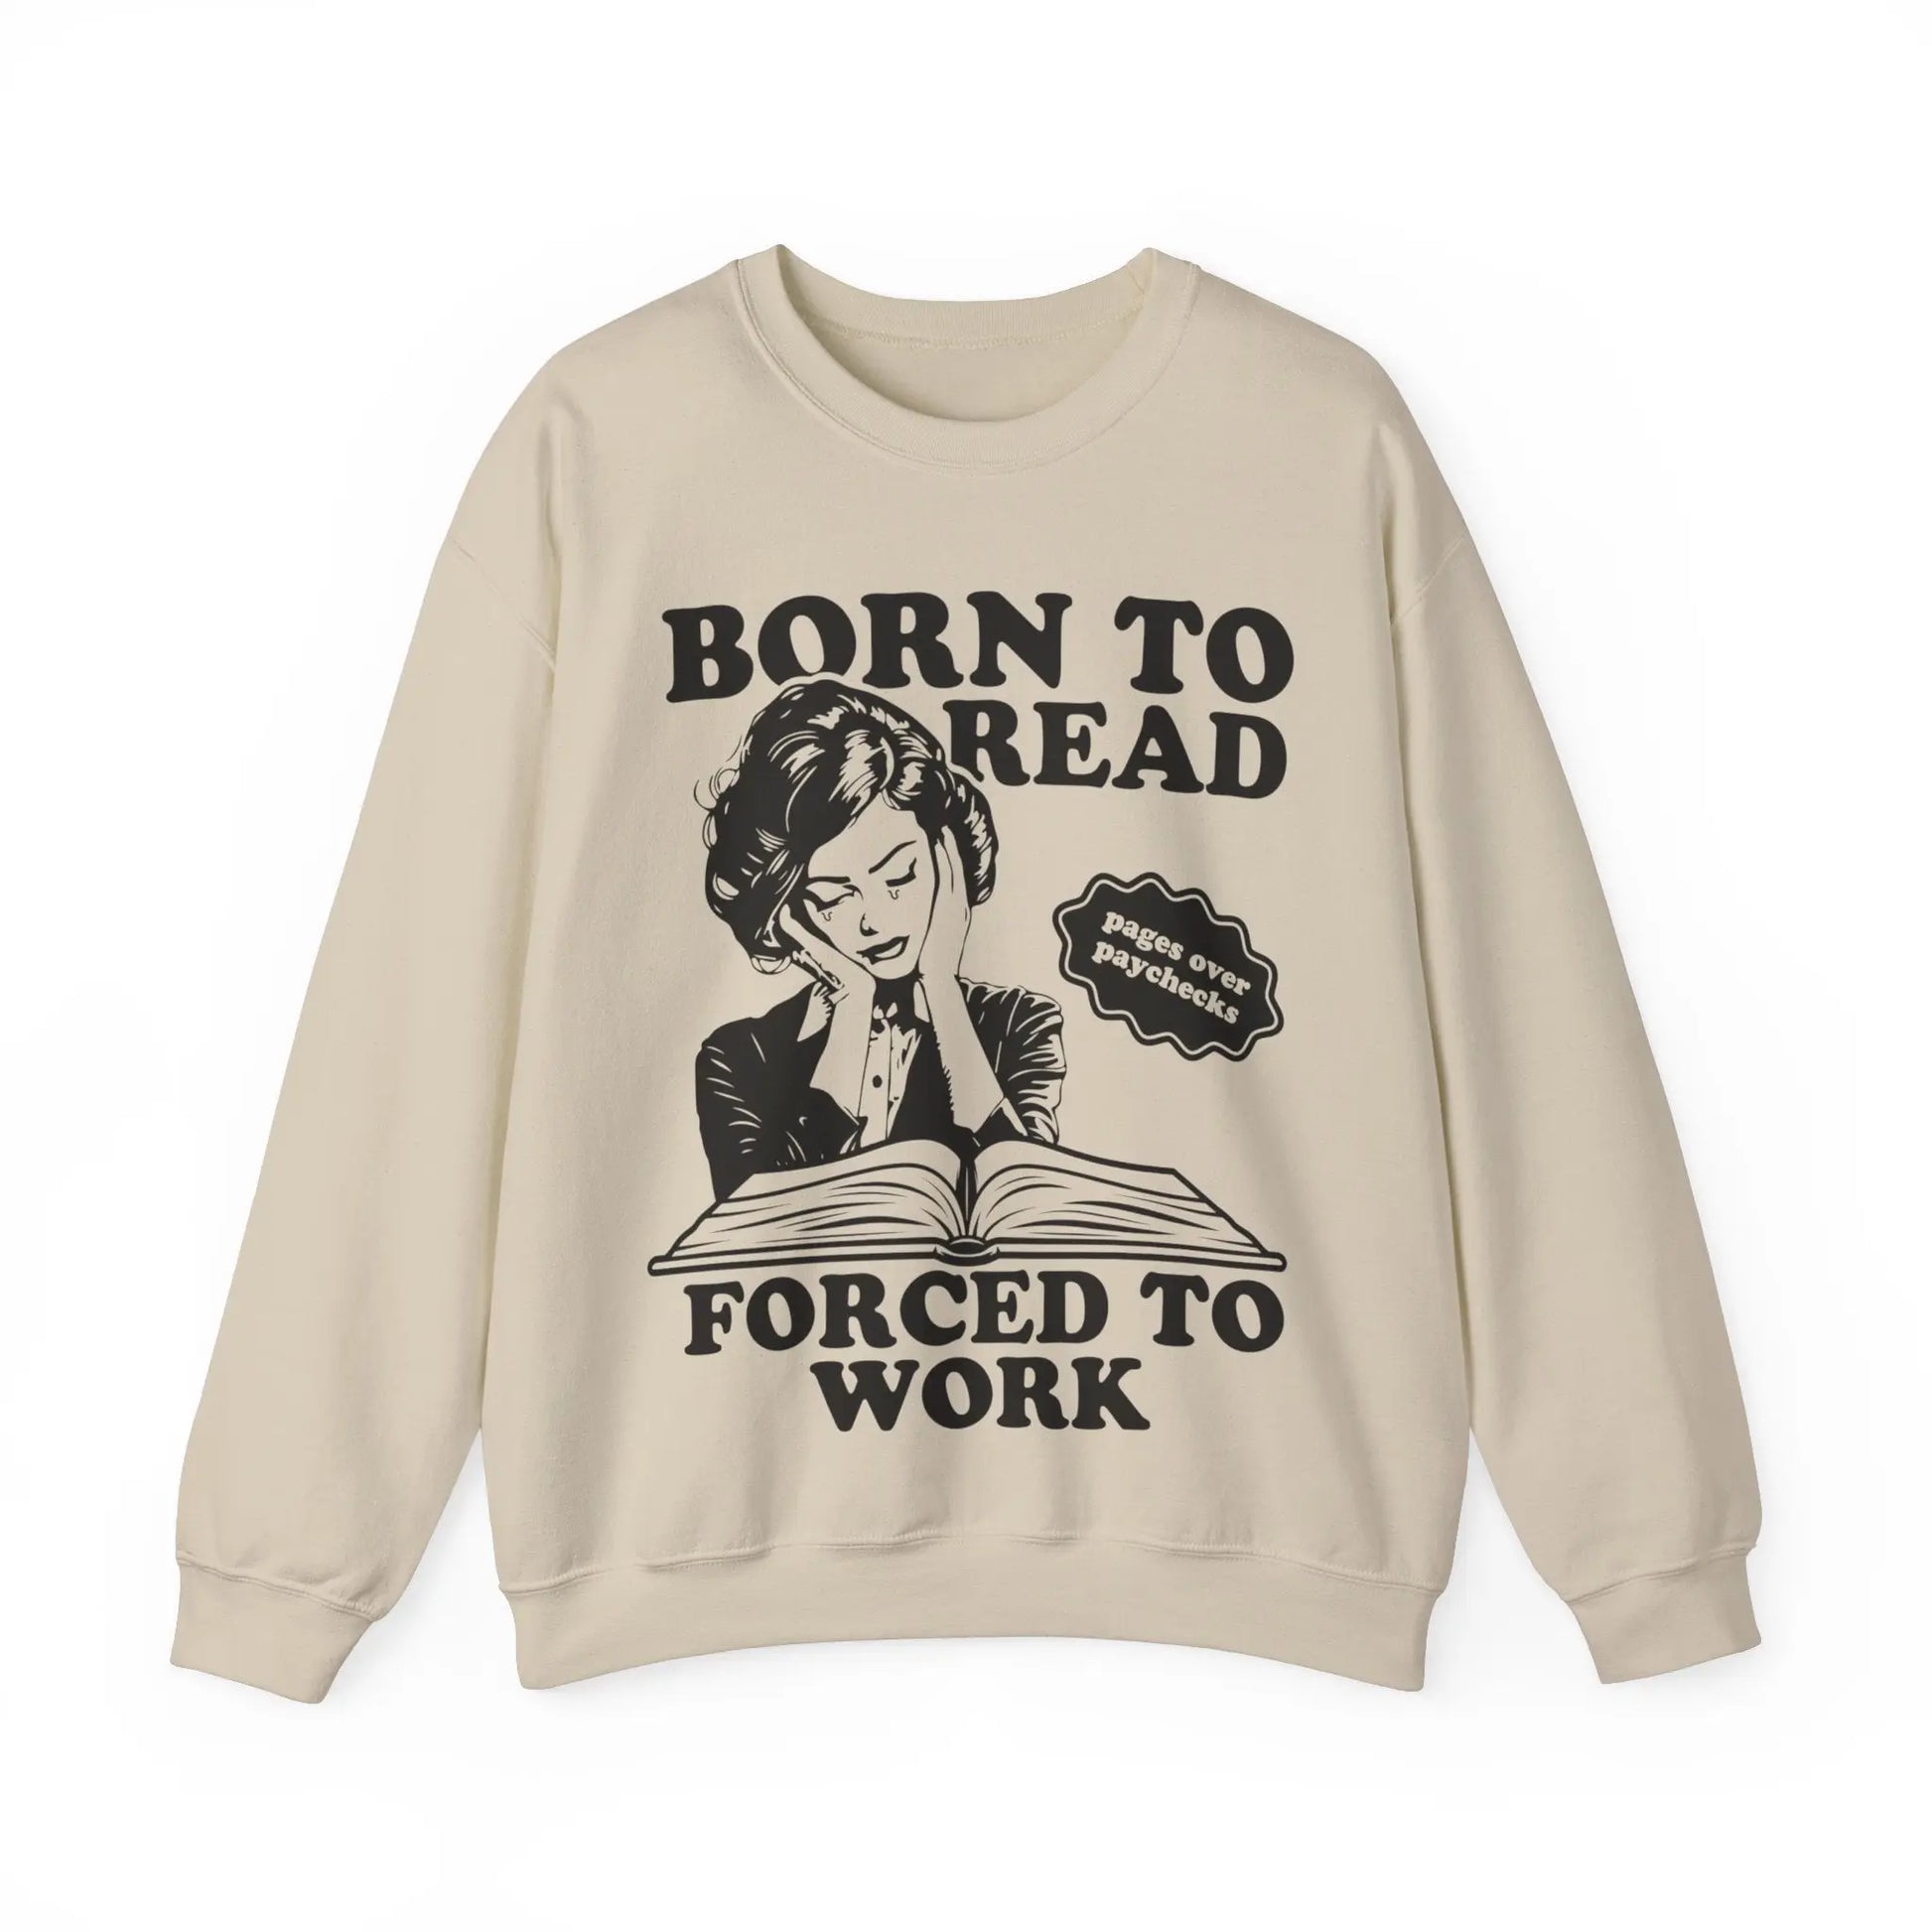 Born To Read Forced to Work Retro Spicy Smut Bookish Gift Bibliophile Dark Romantasy Reader Book Club Lover BookTok - Stay Tomorrow Needs You Born To Read Forced to Work Retro Spicy Smut Bookish Gift Bibliophile Dark Romantasy Reader Book Club Lover BookTok